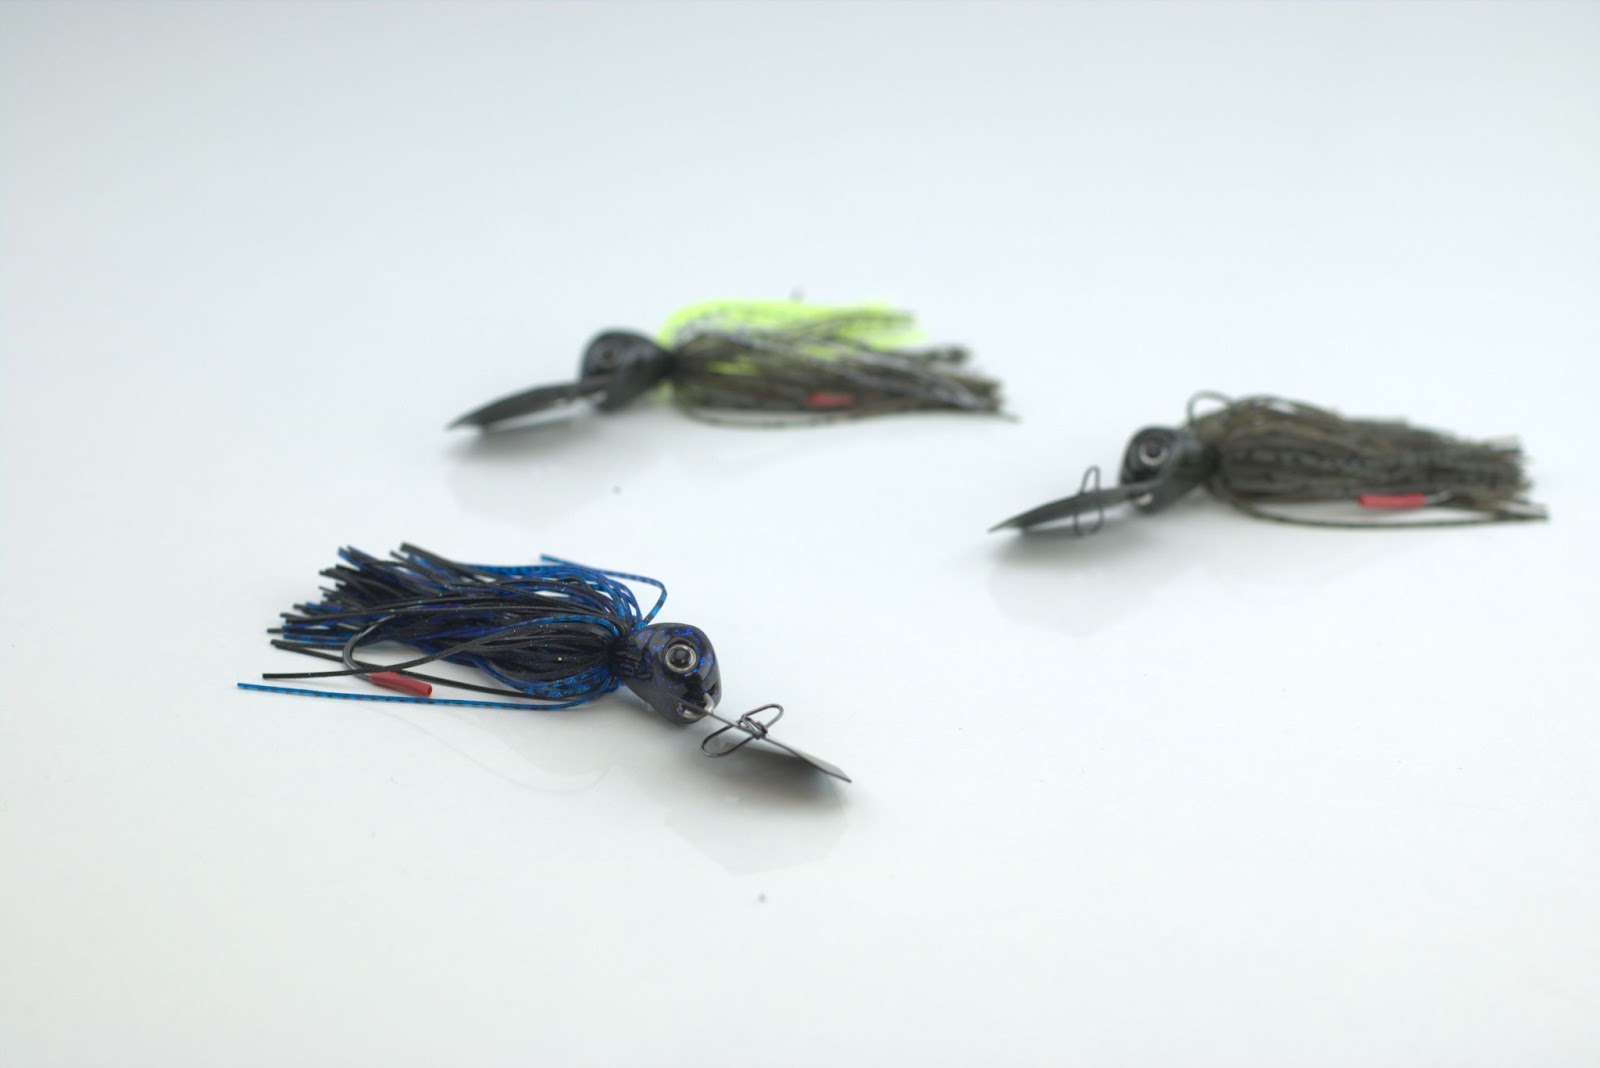 The 8 Best Spring Fishing Lures - FishUSA